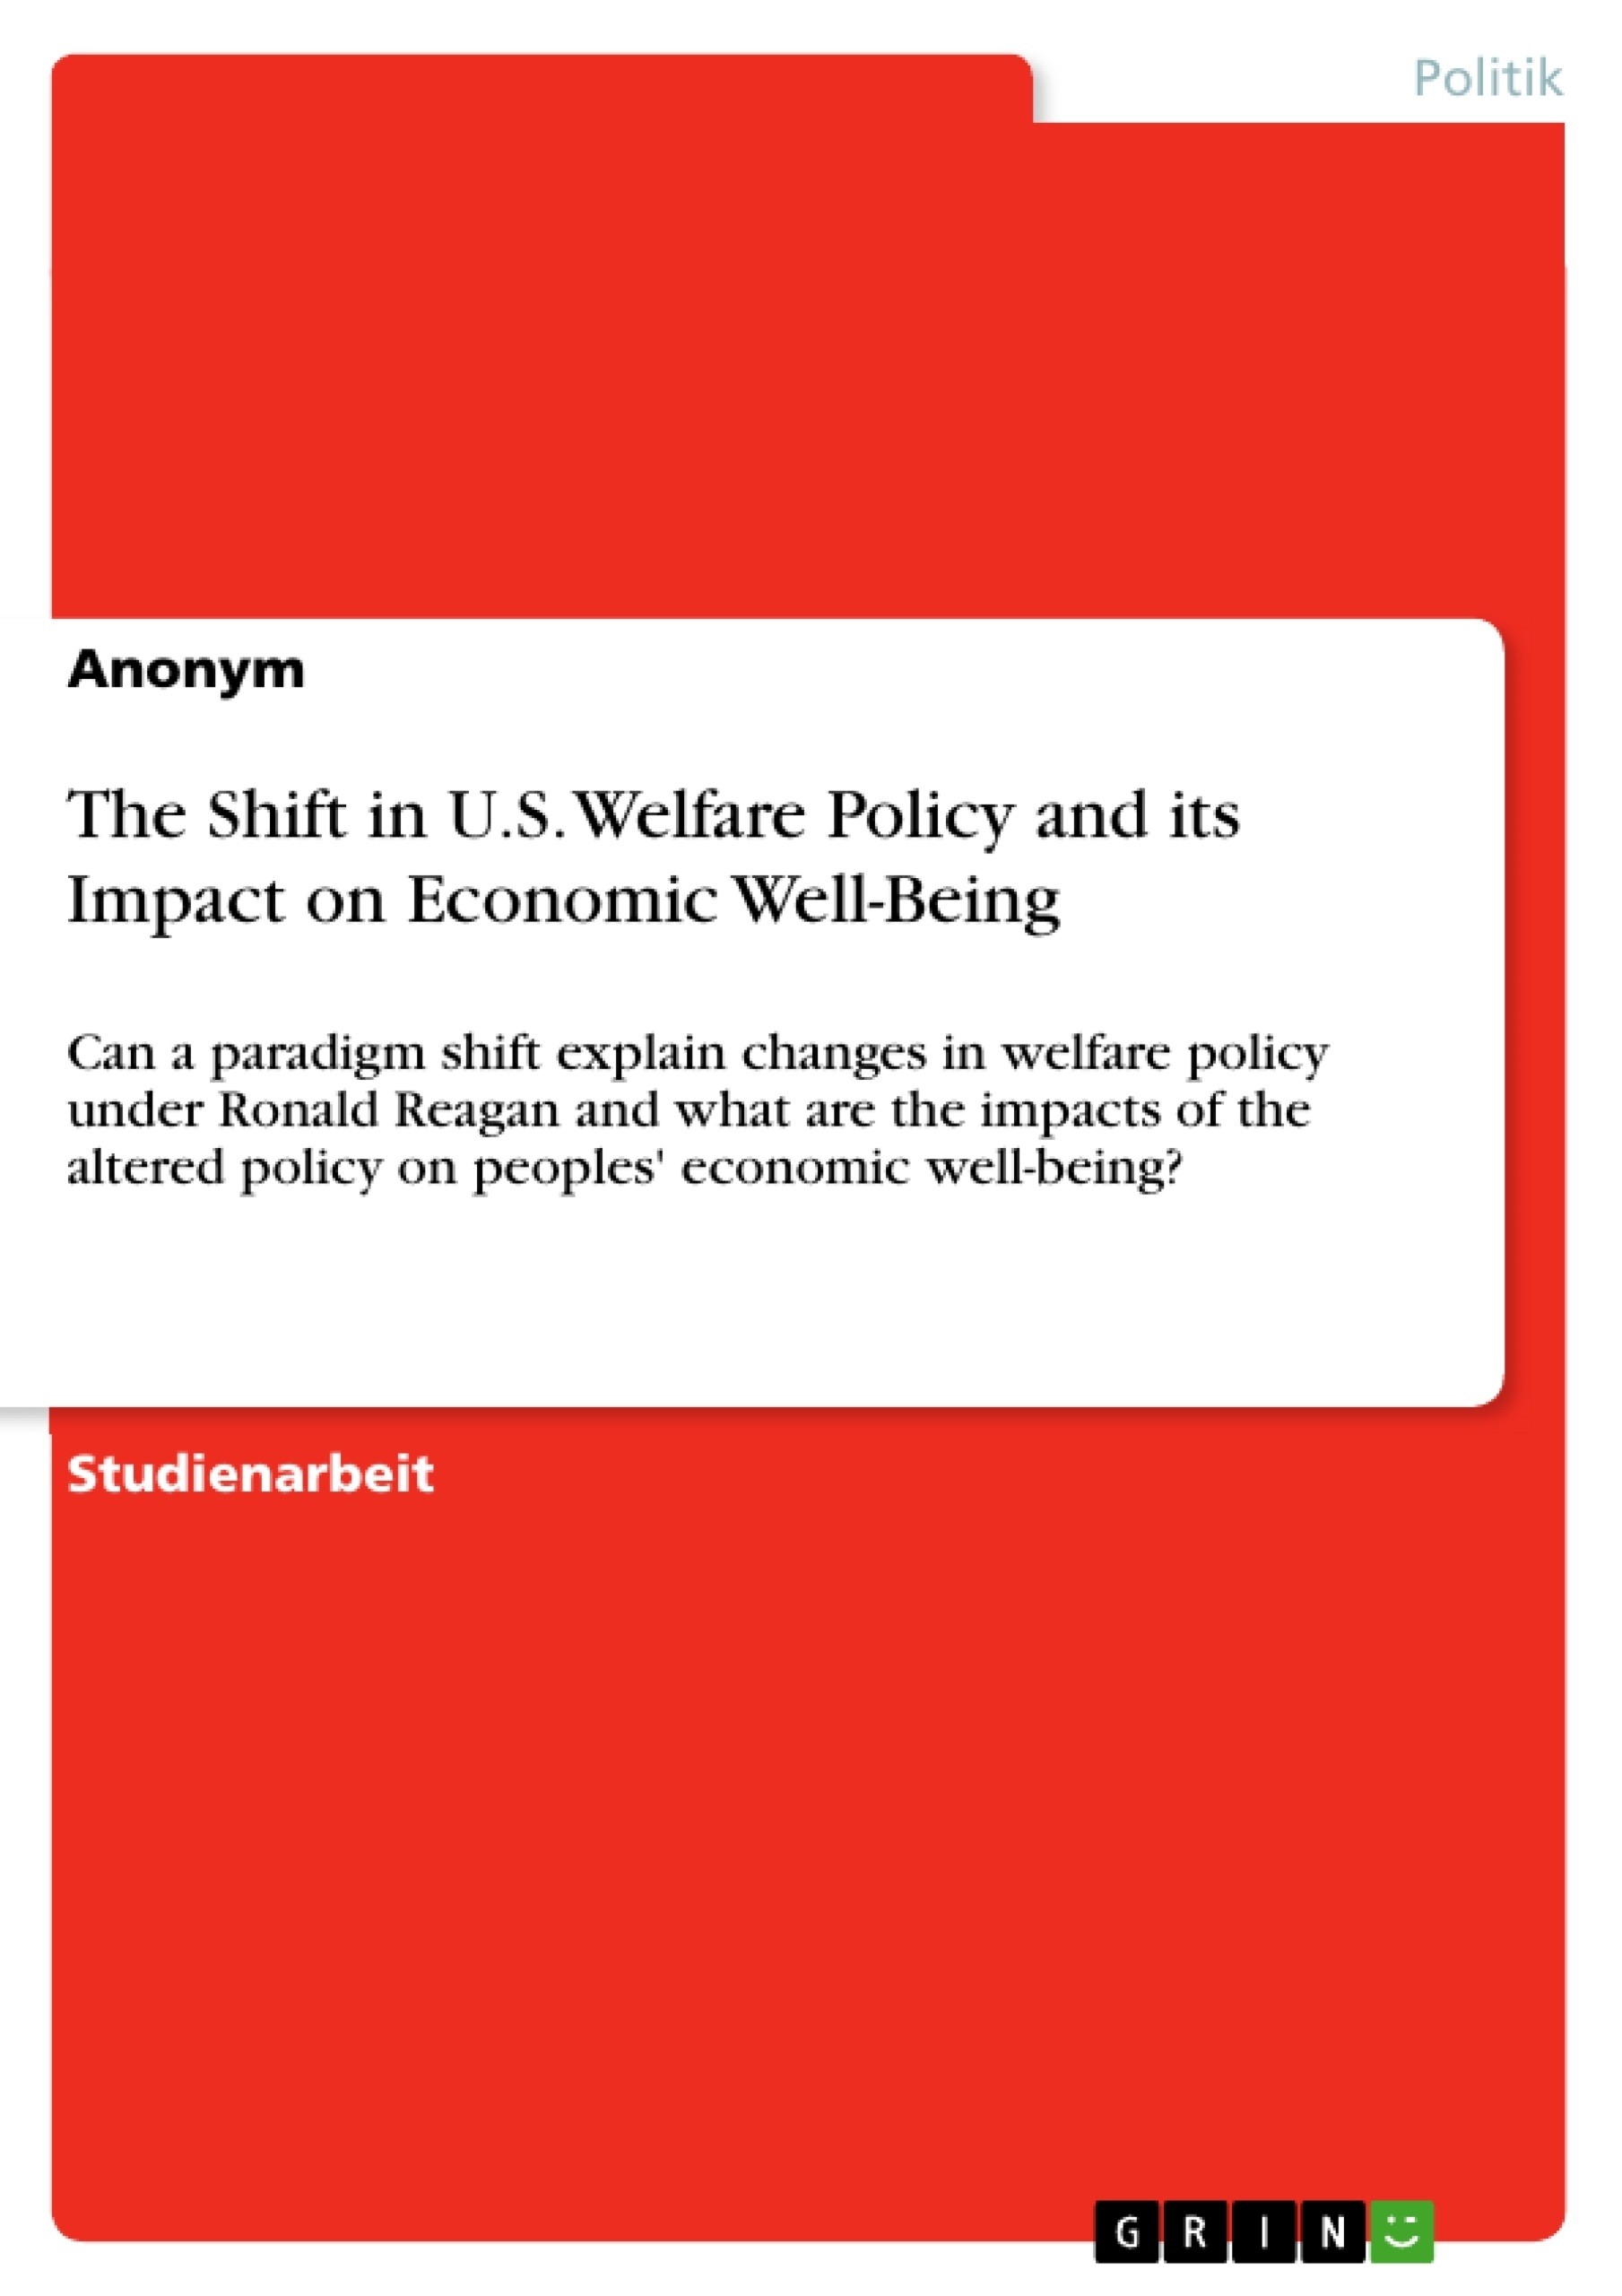 Titel: The Shift in U.S. Welfare Policy and its Impact on Economic Well-Being